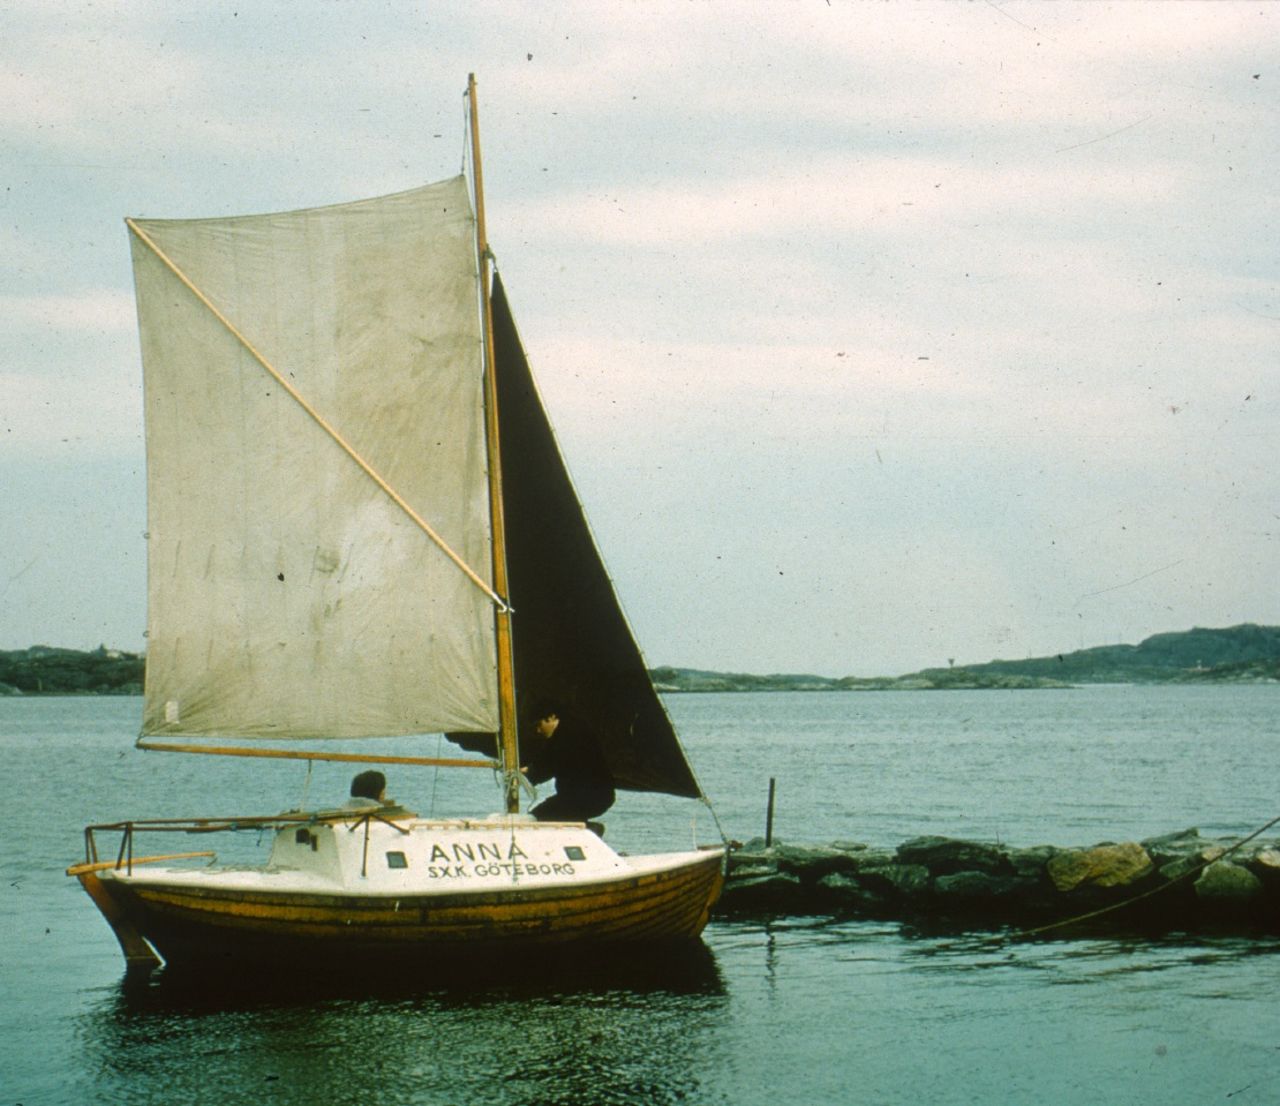 Yrvind was inducted into the Museum of Yachting's Hall of Fame in 1988, for his many solo expeditions. In 1968 he sailed four meter boat "Anna" (pictured) from Sweden to England.